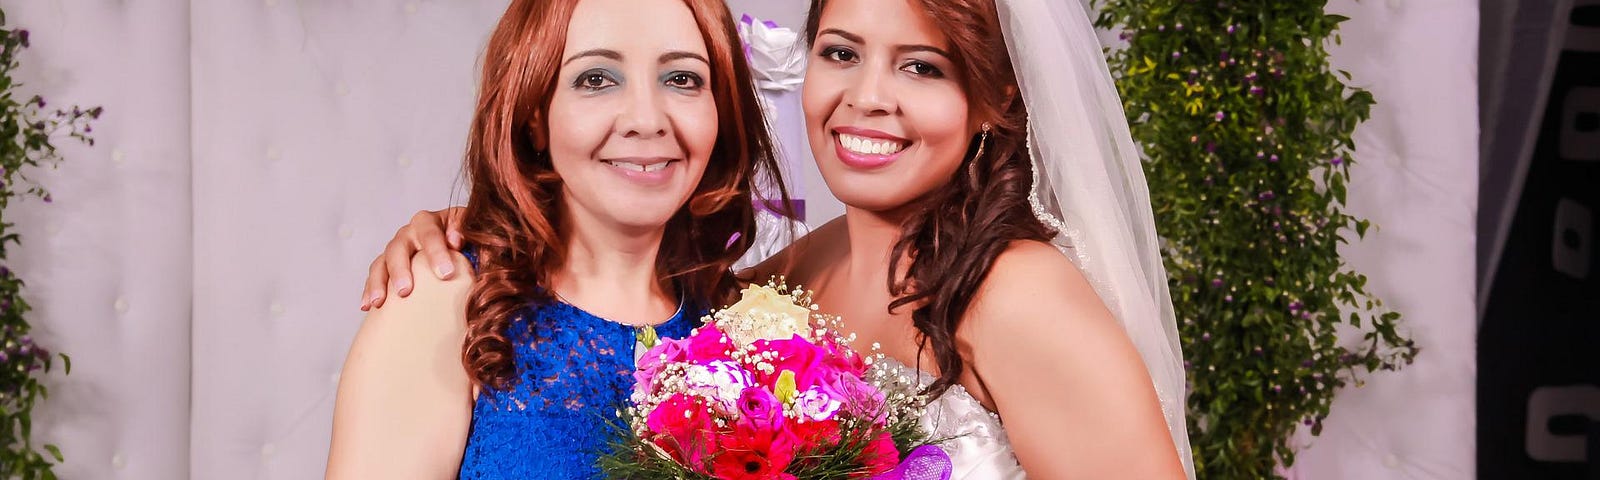 A mother of the bride poses with her wedding-dress clad daughter, who holds a bouquet of flowers. Mom wears a sapphire blue gown and a smile.